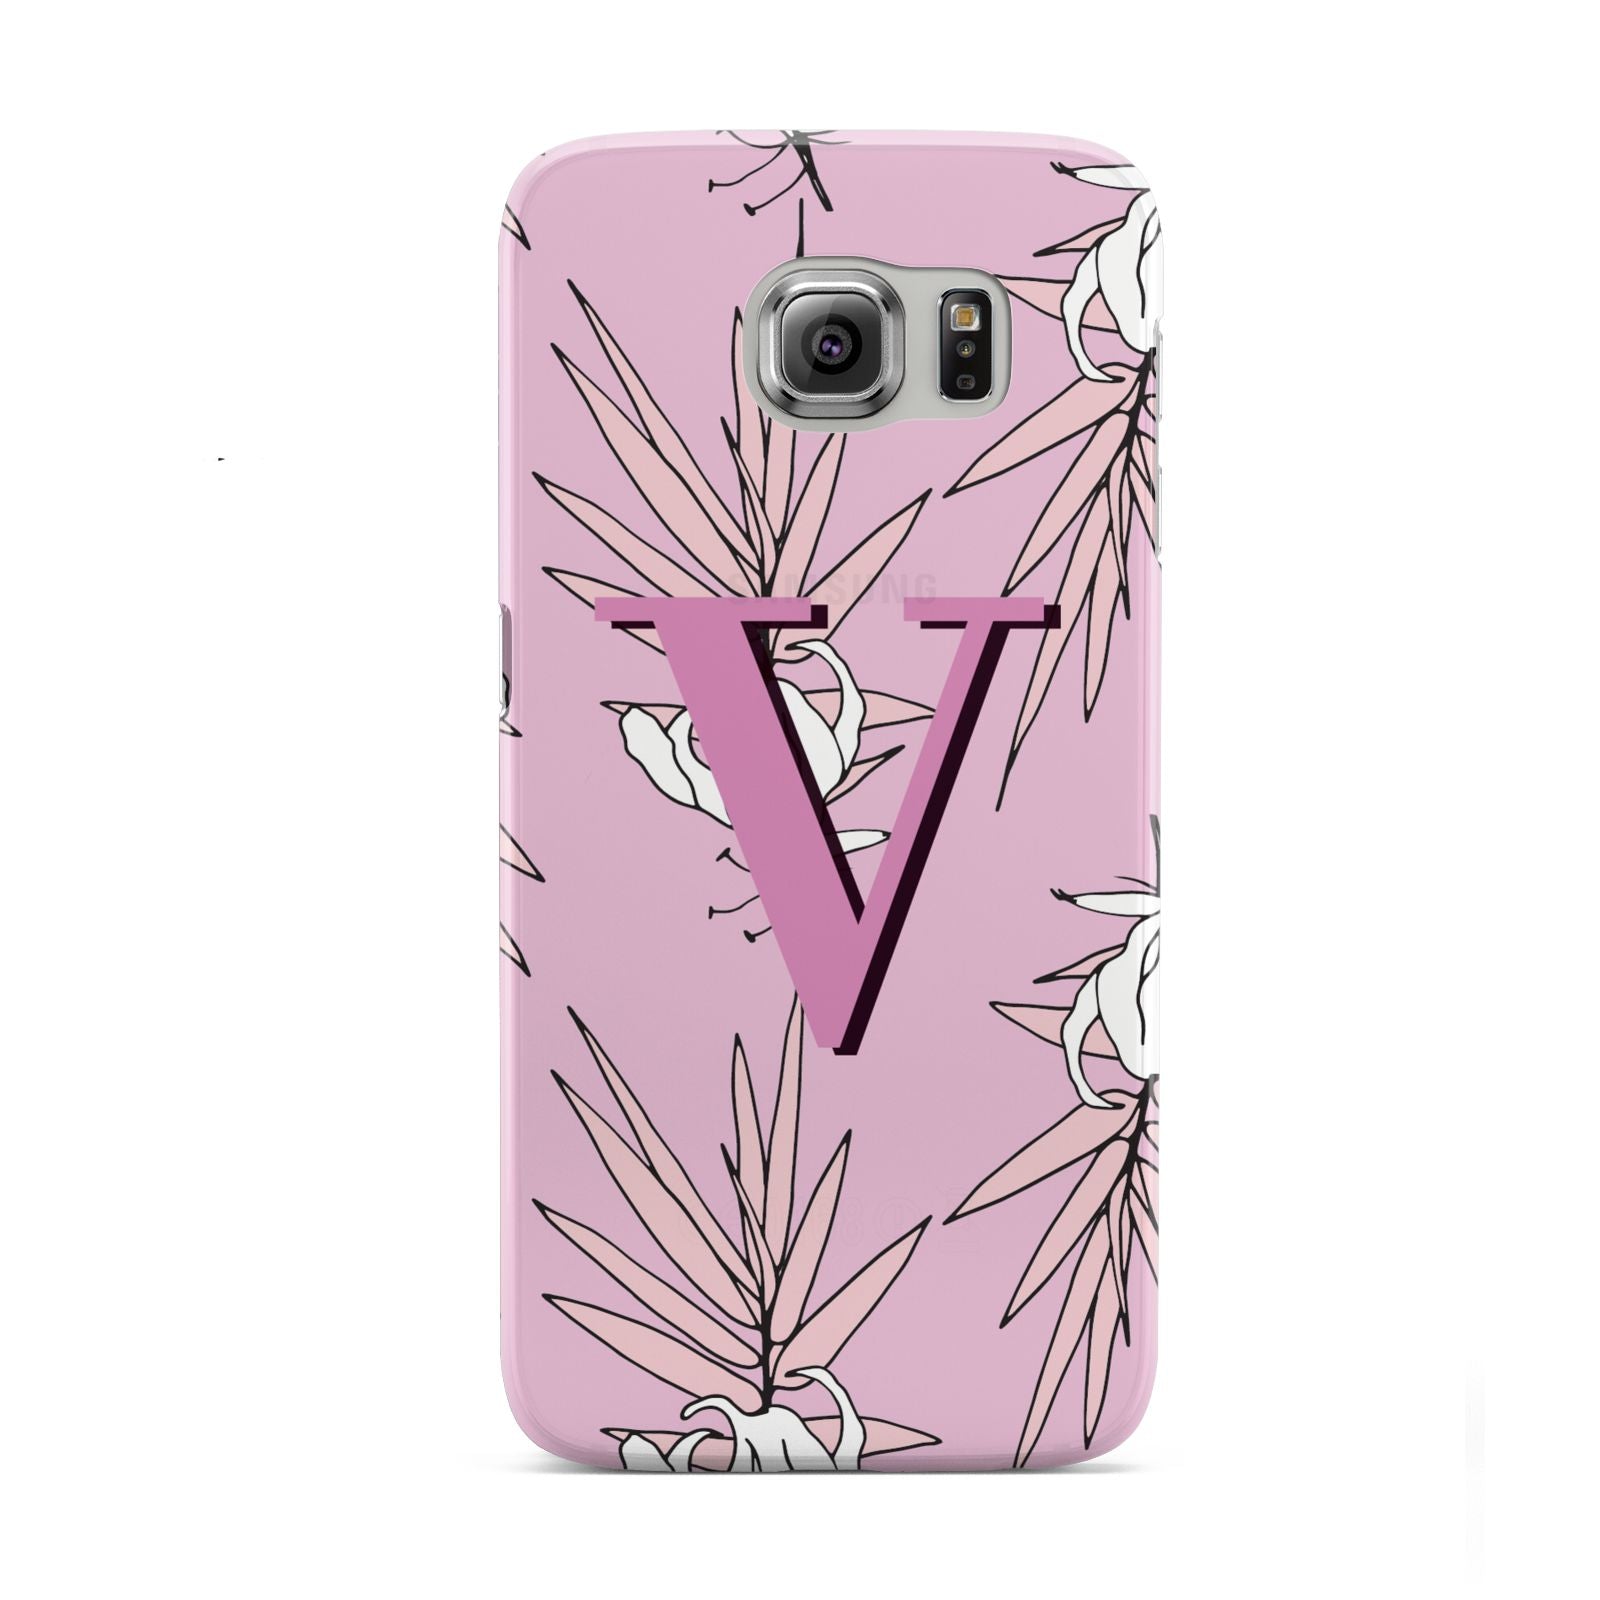 Personalised Pink and White Floral Monogram Samsung Galaxy S6 Case